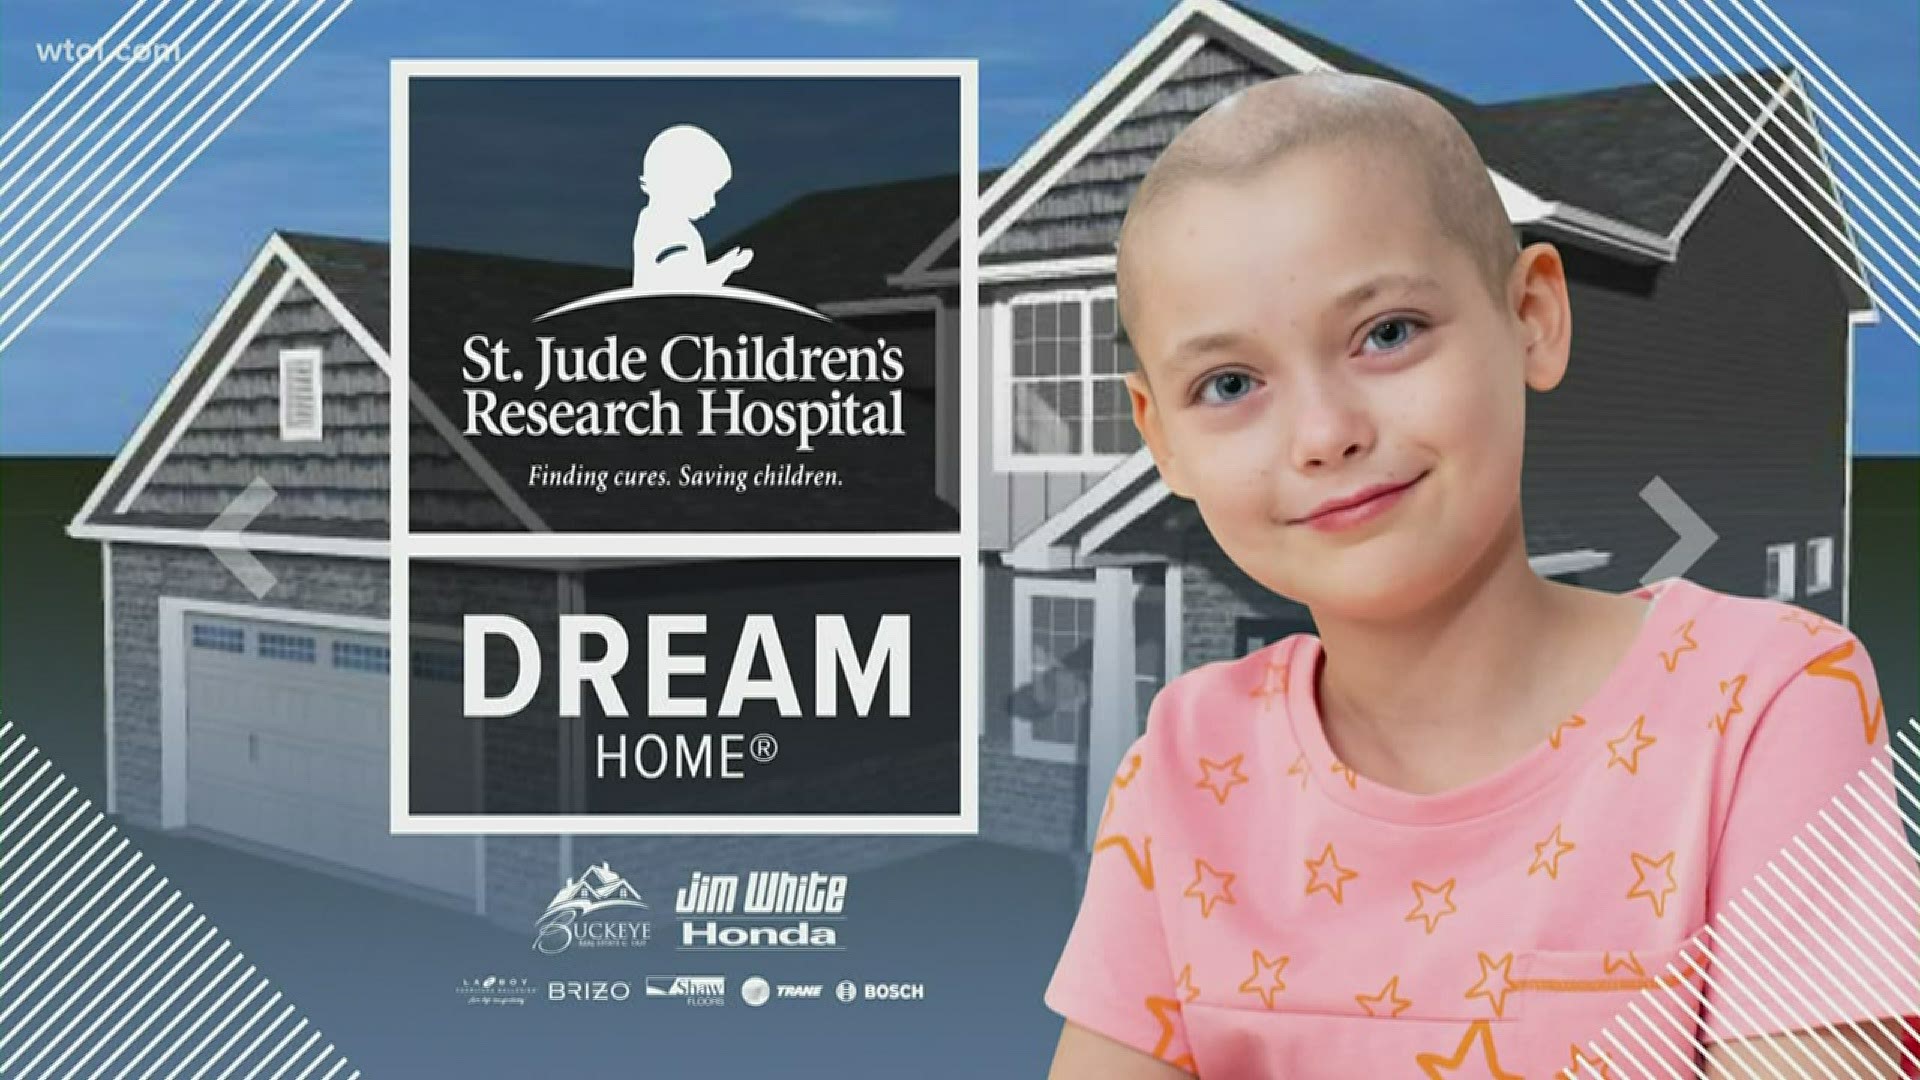 You could also win a brand-new car and many other prizes! Tickets are $100 and help the mission of St. Jude: That no family ever has to pay for a child's treatment.